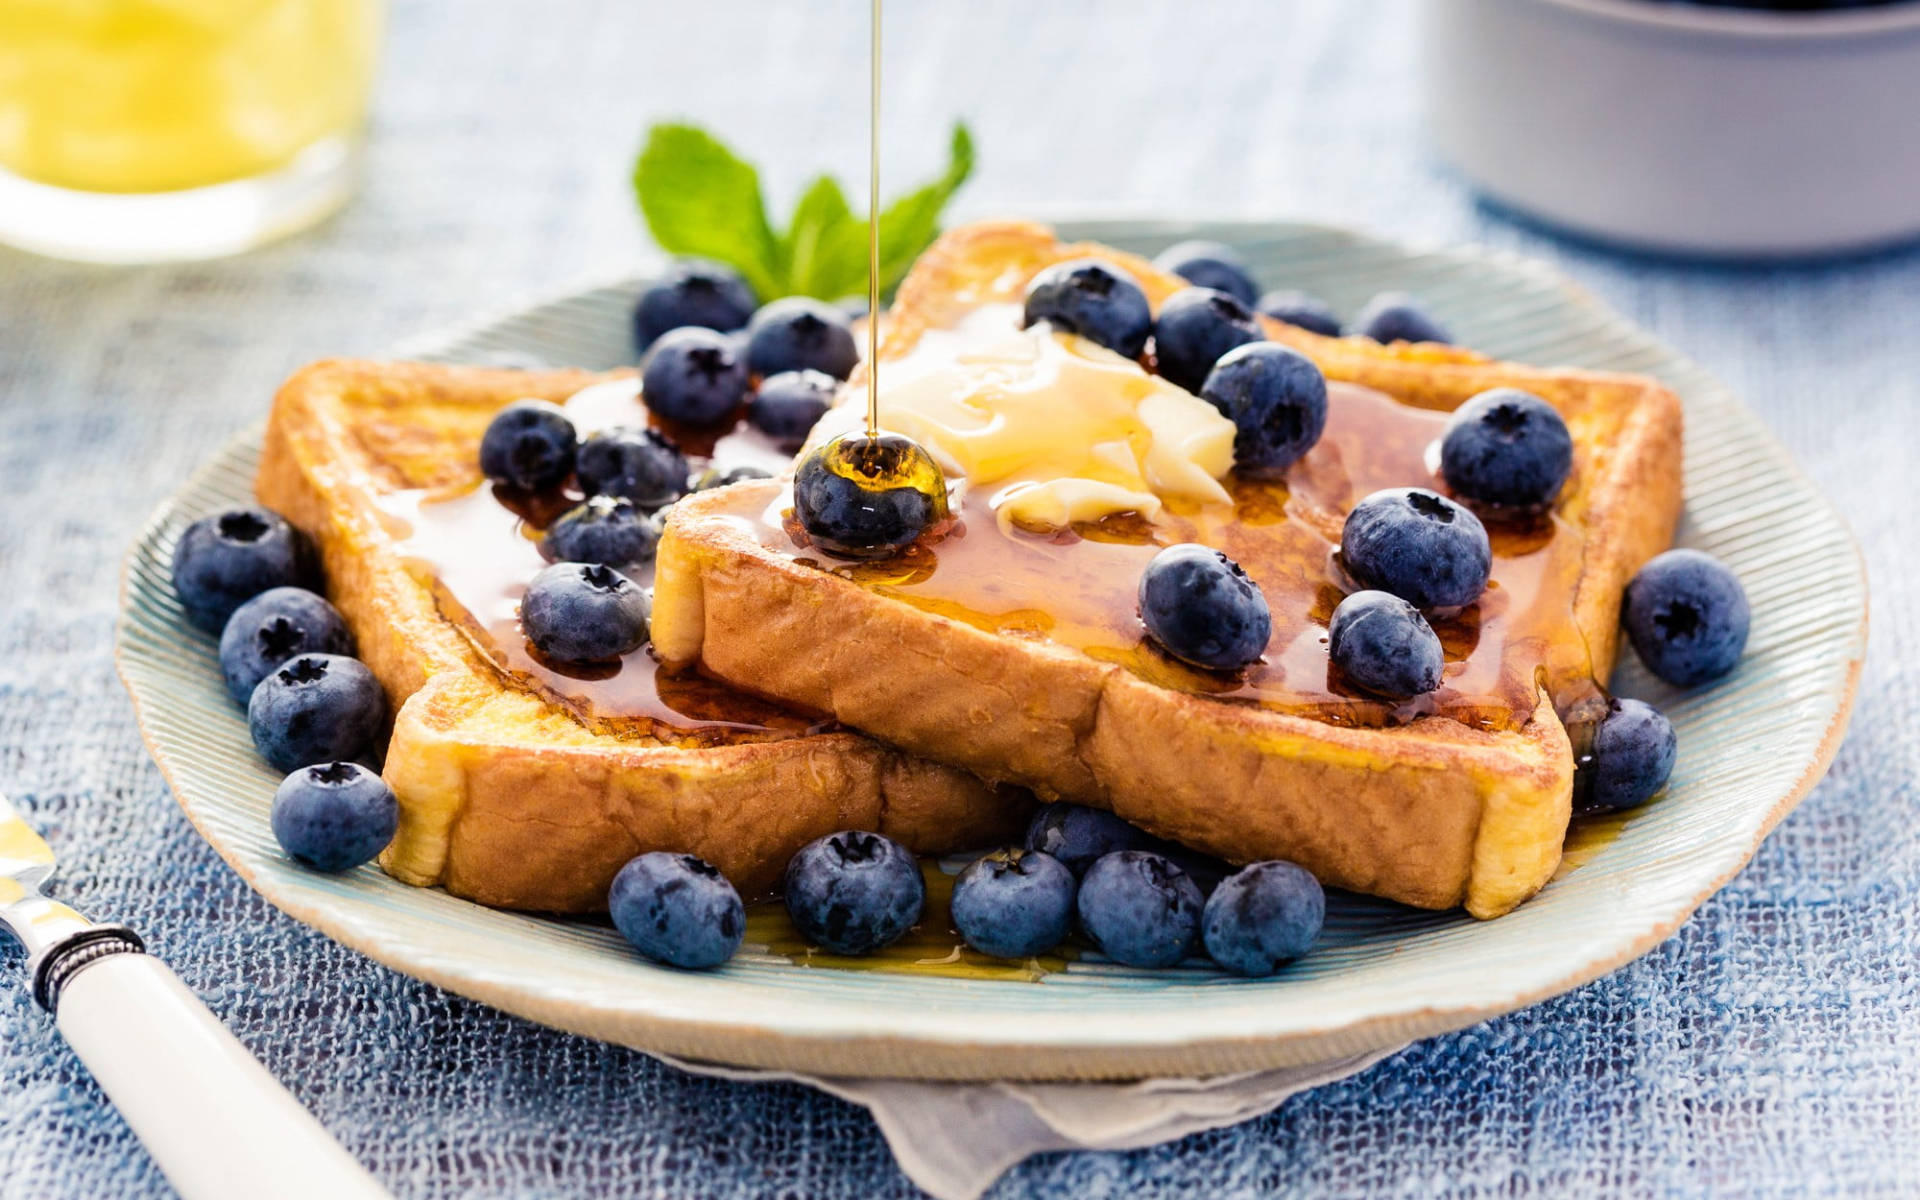 Toasted Bread With Berries Wallpaper